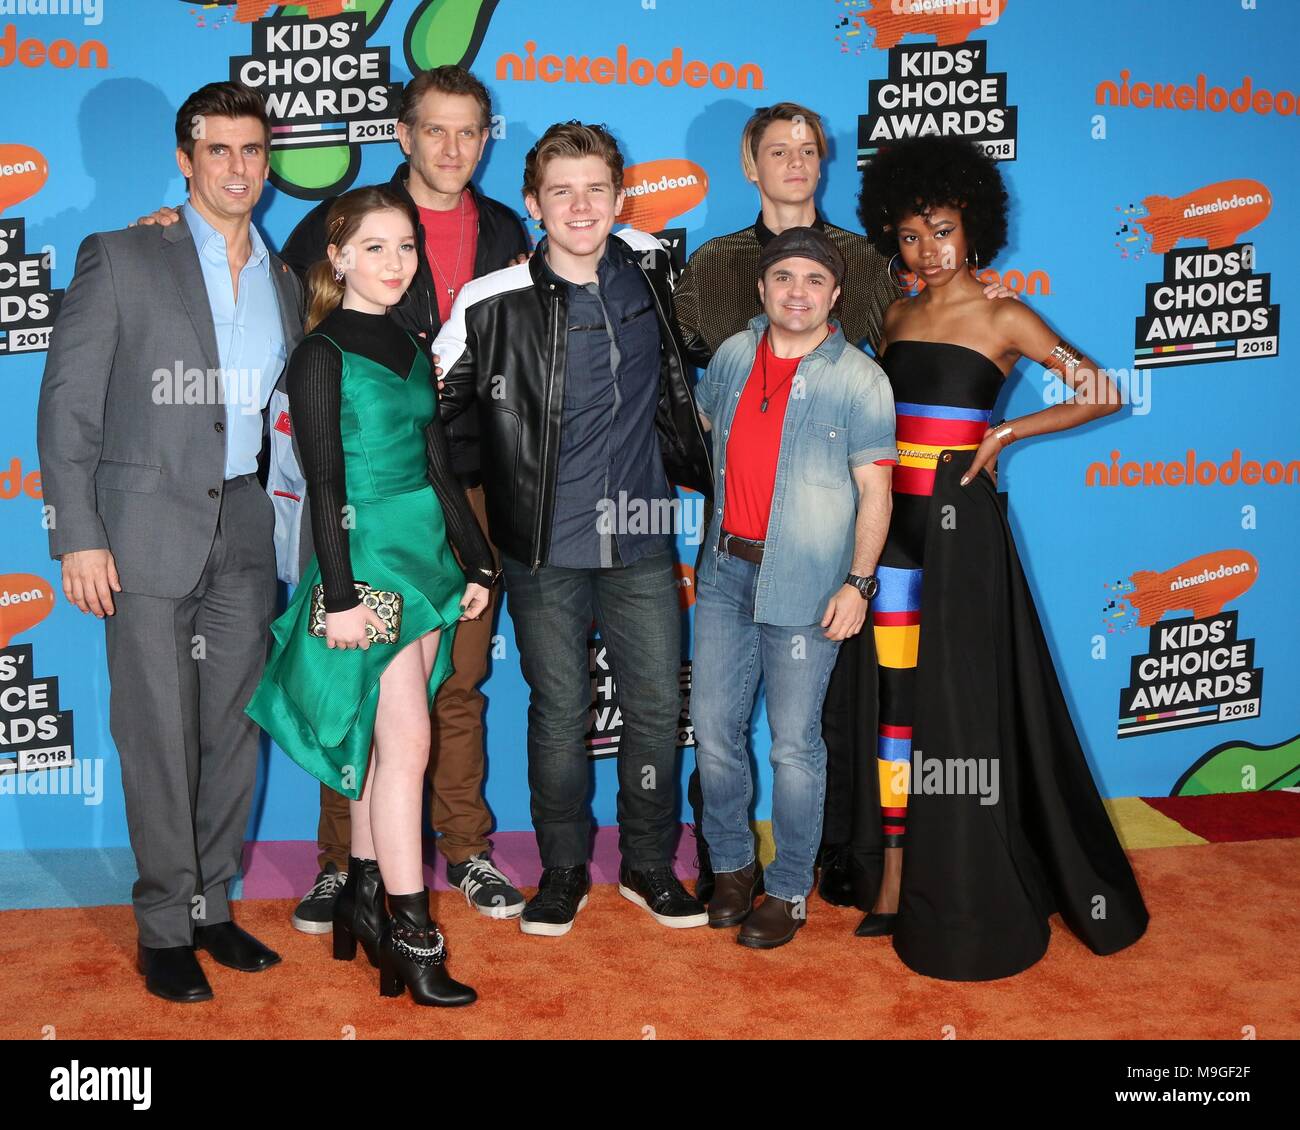 Henry Danger Cast, Cooper Barnes, Ella Anderson, Jeffrey Nicholas Brown, Michael Cohen,Jace Norman, Sean Ryan Fox, Riele Downs at arrivals for Nickelodeon's 2018 Kids' Choice Awards - Part 2, The Forum, Inglewood, CA March 24, 2018. Photo By: Priscilla Grant/Everett Collection Stock Photo